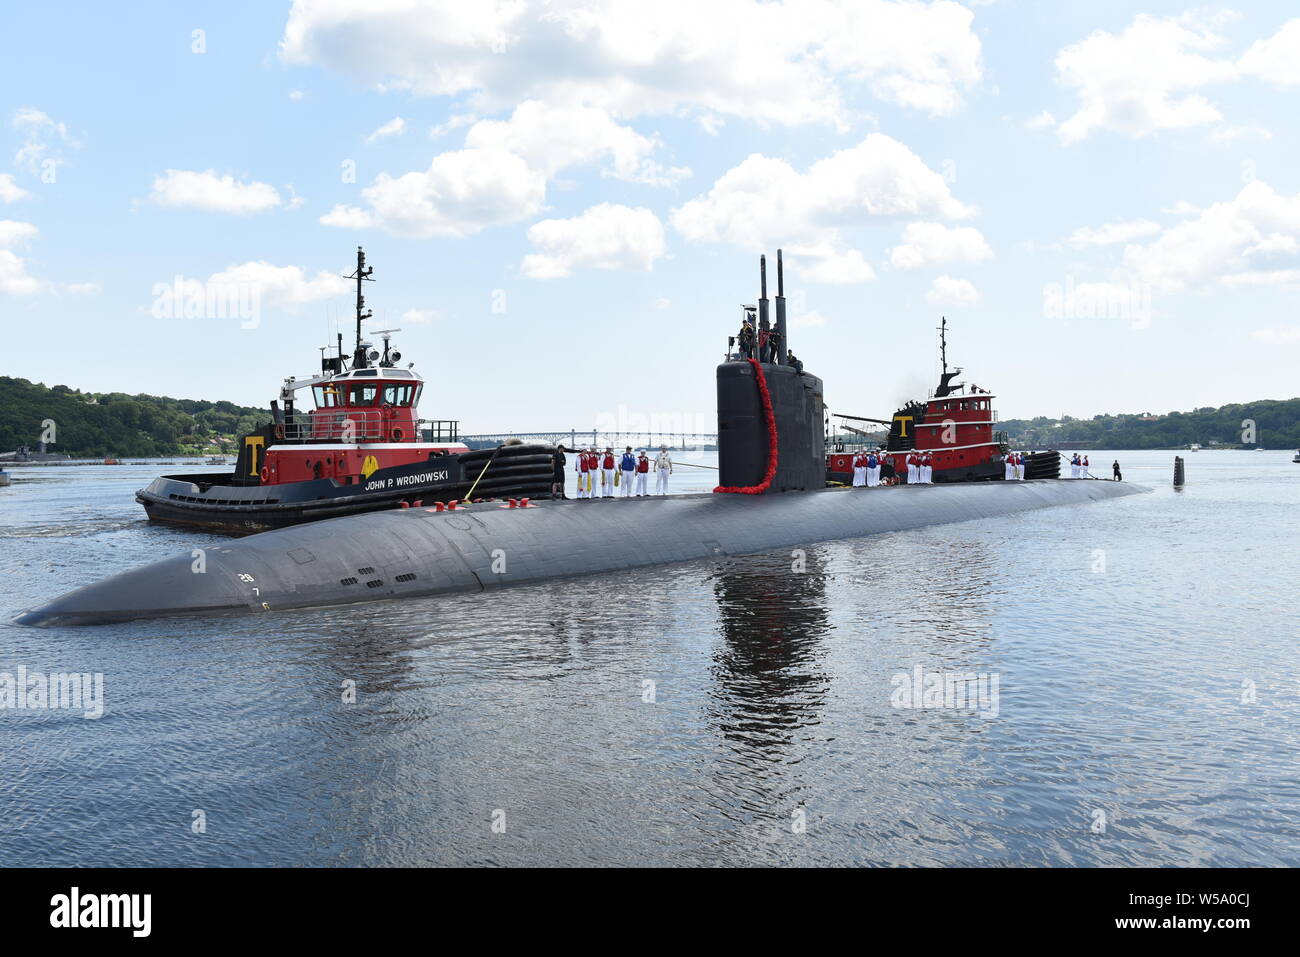 GROTON, Conn. (July. 24, 2019) Sailors assigned to the Los Angeles-class fast-attack submarine USS Hartford (SSN 768), stand topside as they pull into their homeport at Naval Submarine Base New London in Groton, Conn. July 24, 2019. Hartford executed the chief of naval operation’s maritime strategy in supporting national security interests and maritime security operations. (U.S. Navy photo by Mass Communication Specialist 1st Class Steven Hoskins) Stock Photo